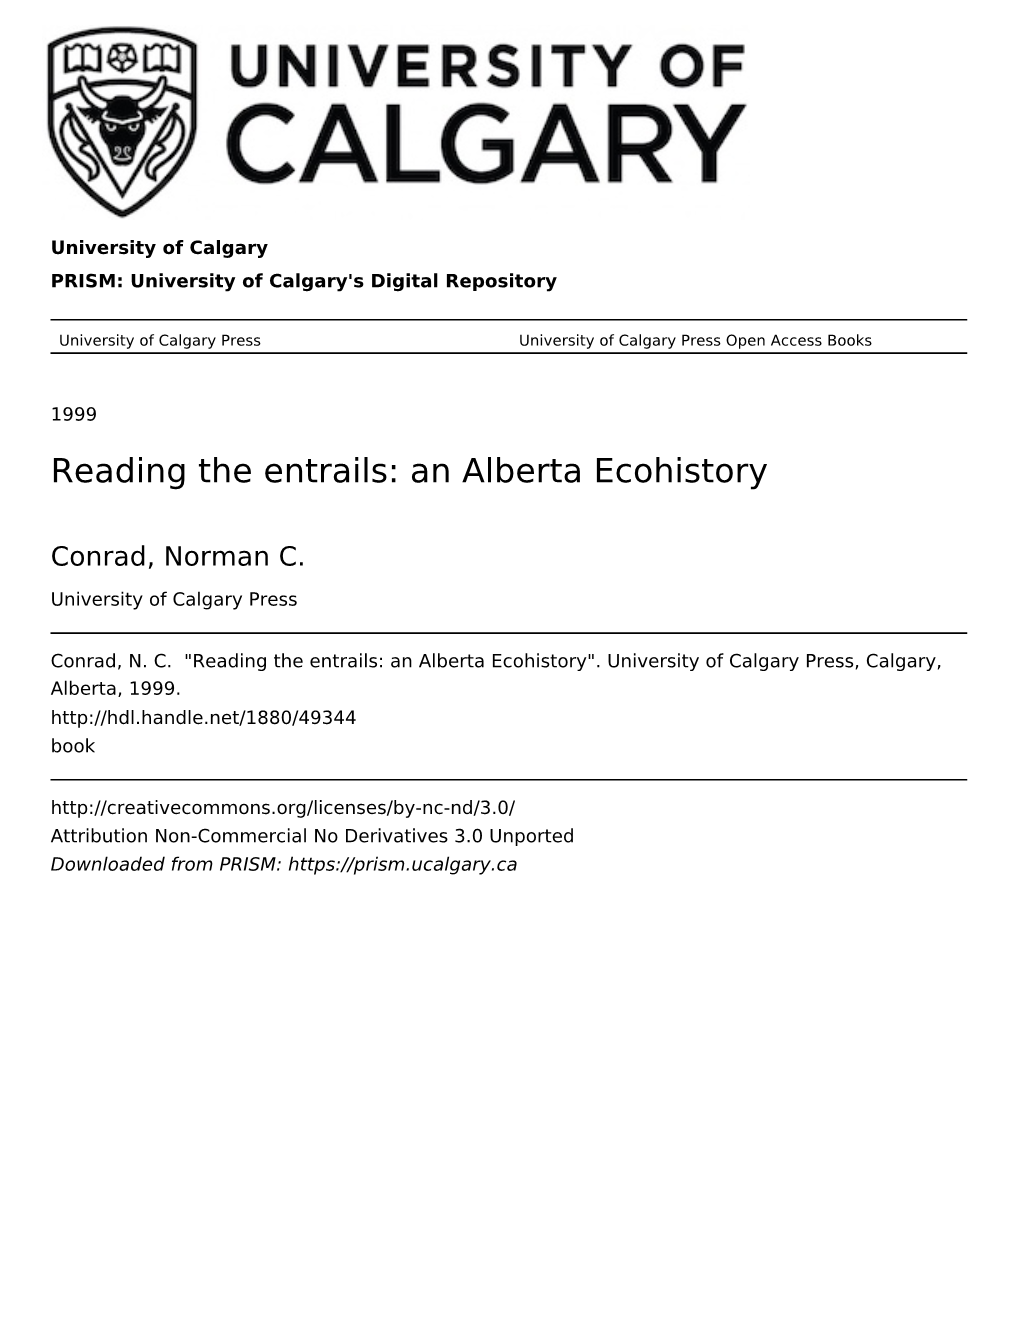 Reading the Entrails: an Alberta Ecohistory